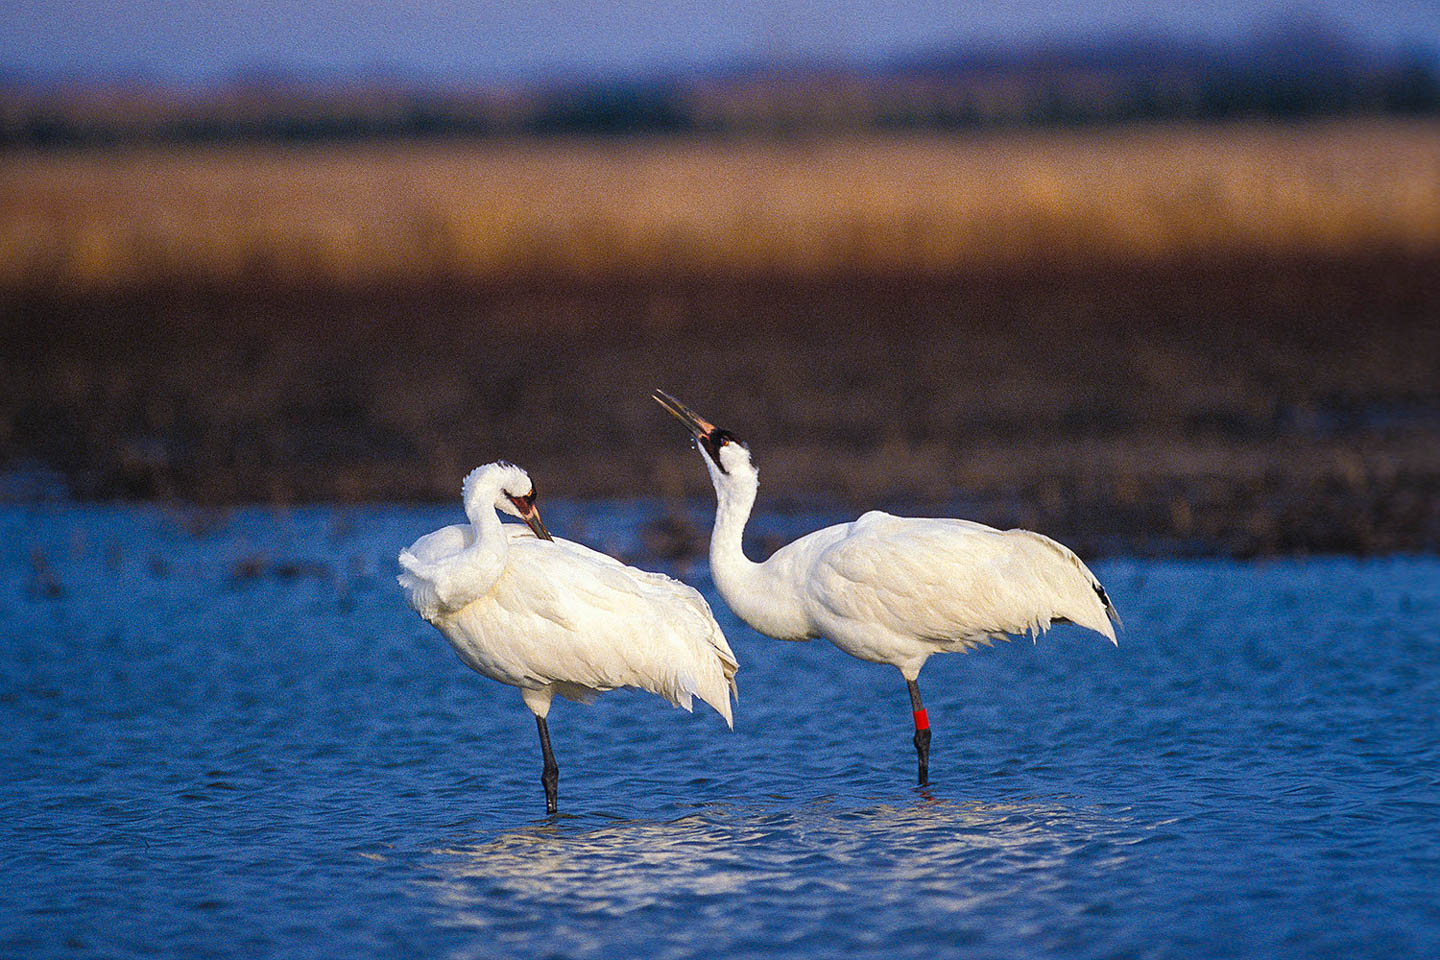 Read More: Whooping crane reporting